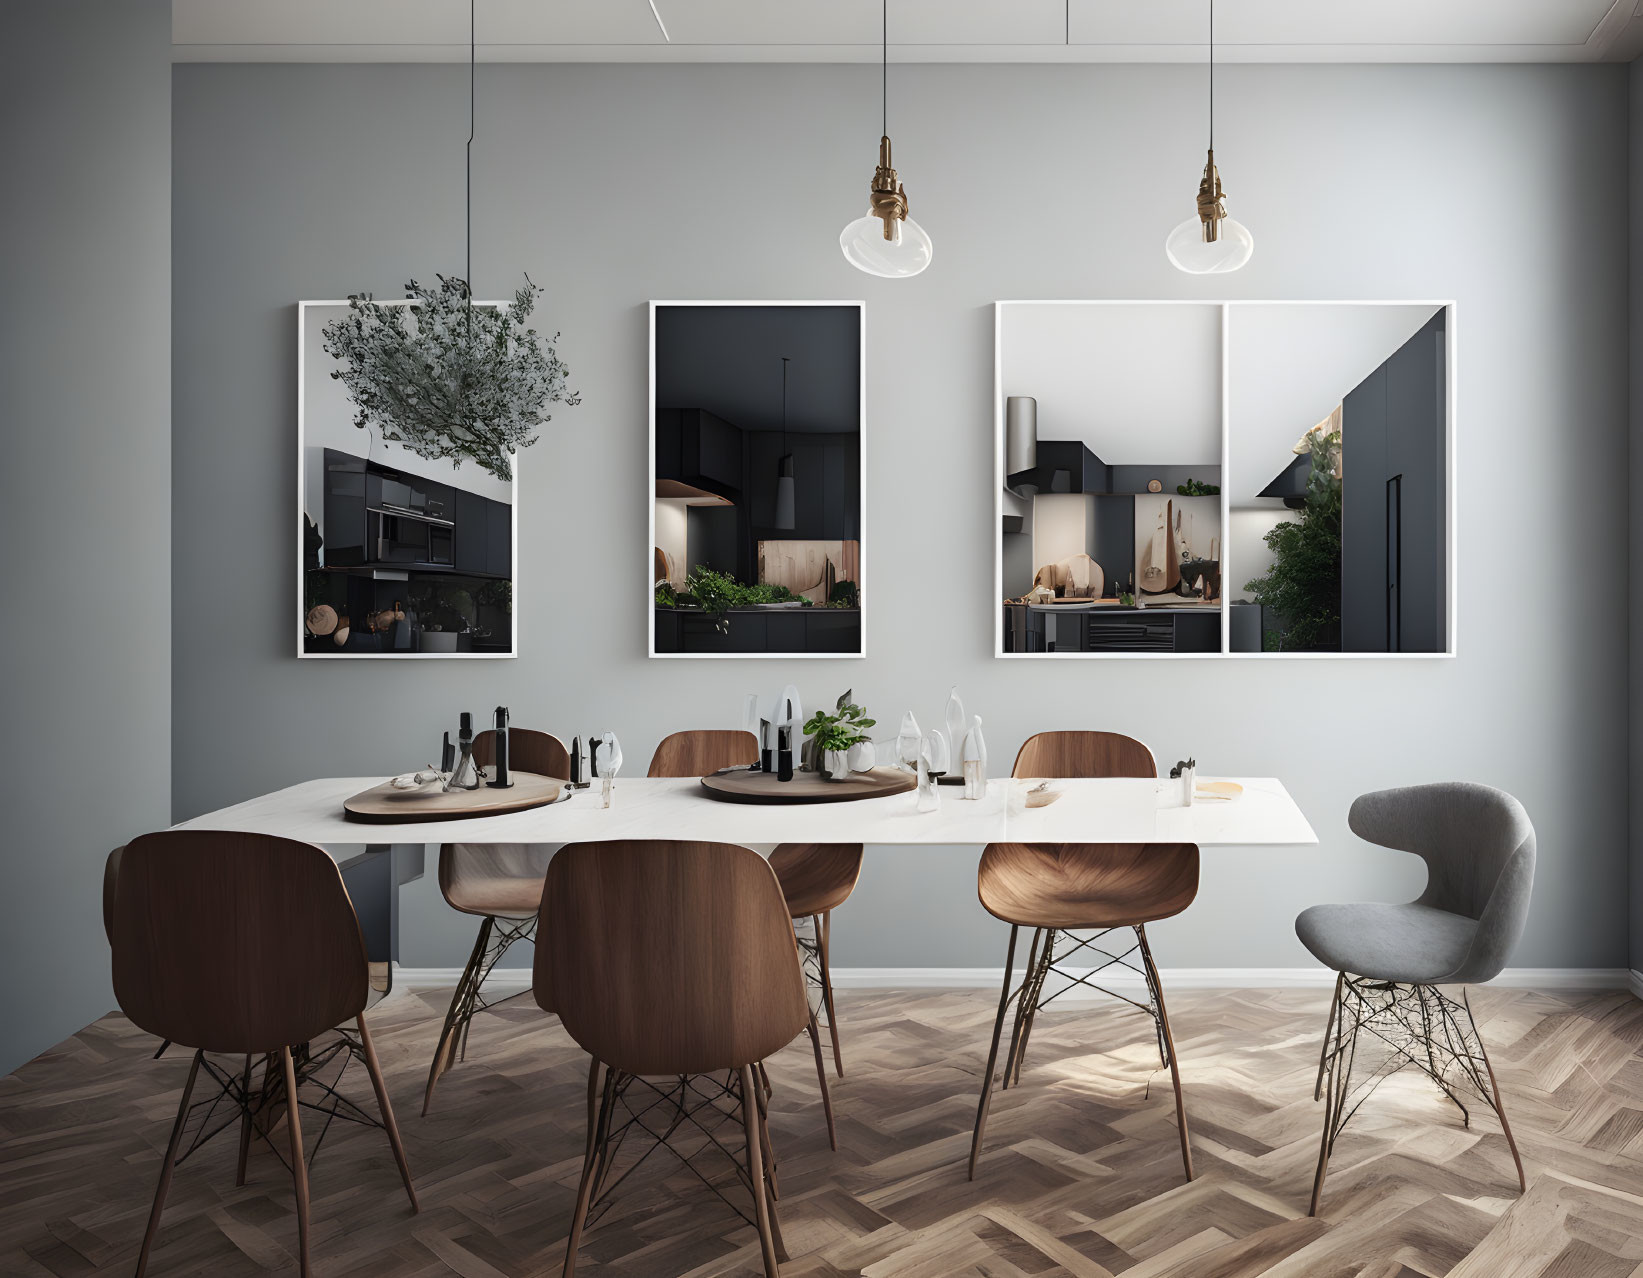 Contemporary dining room with wooden table, brown chairs, gray walls, pendant lights, and interior space